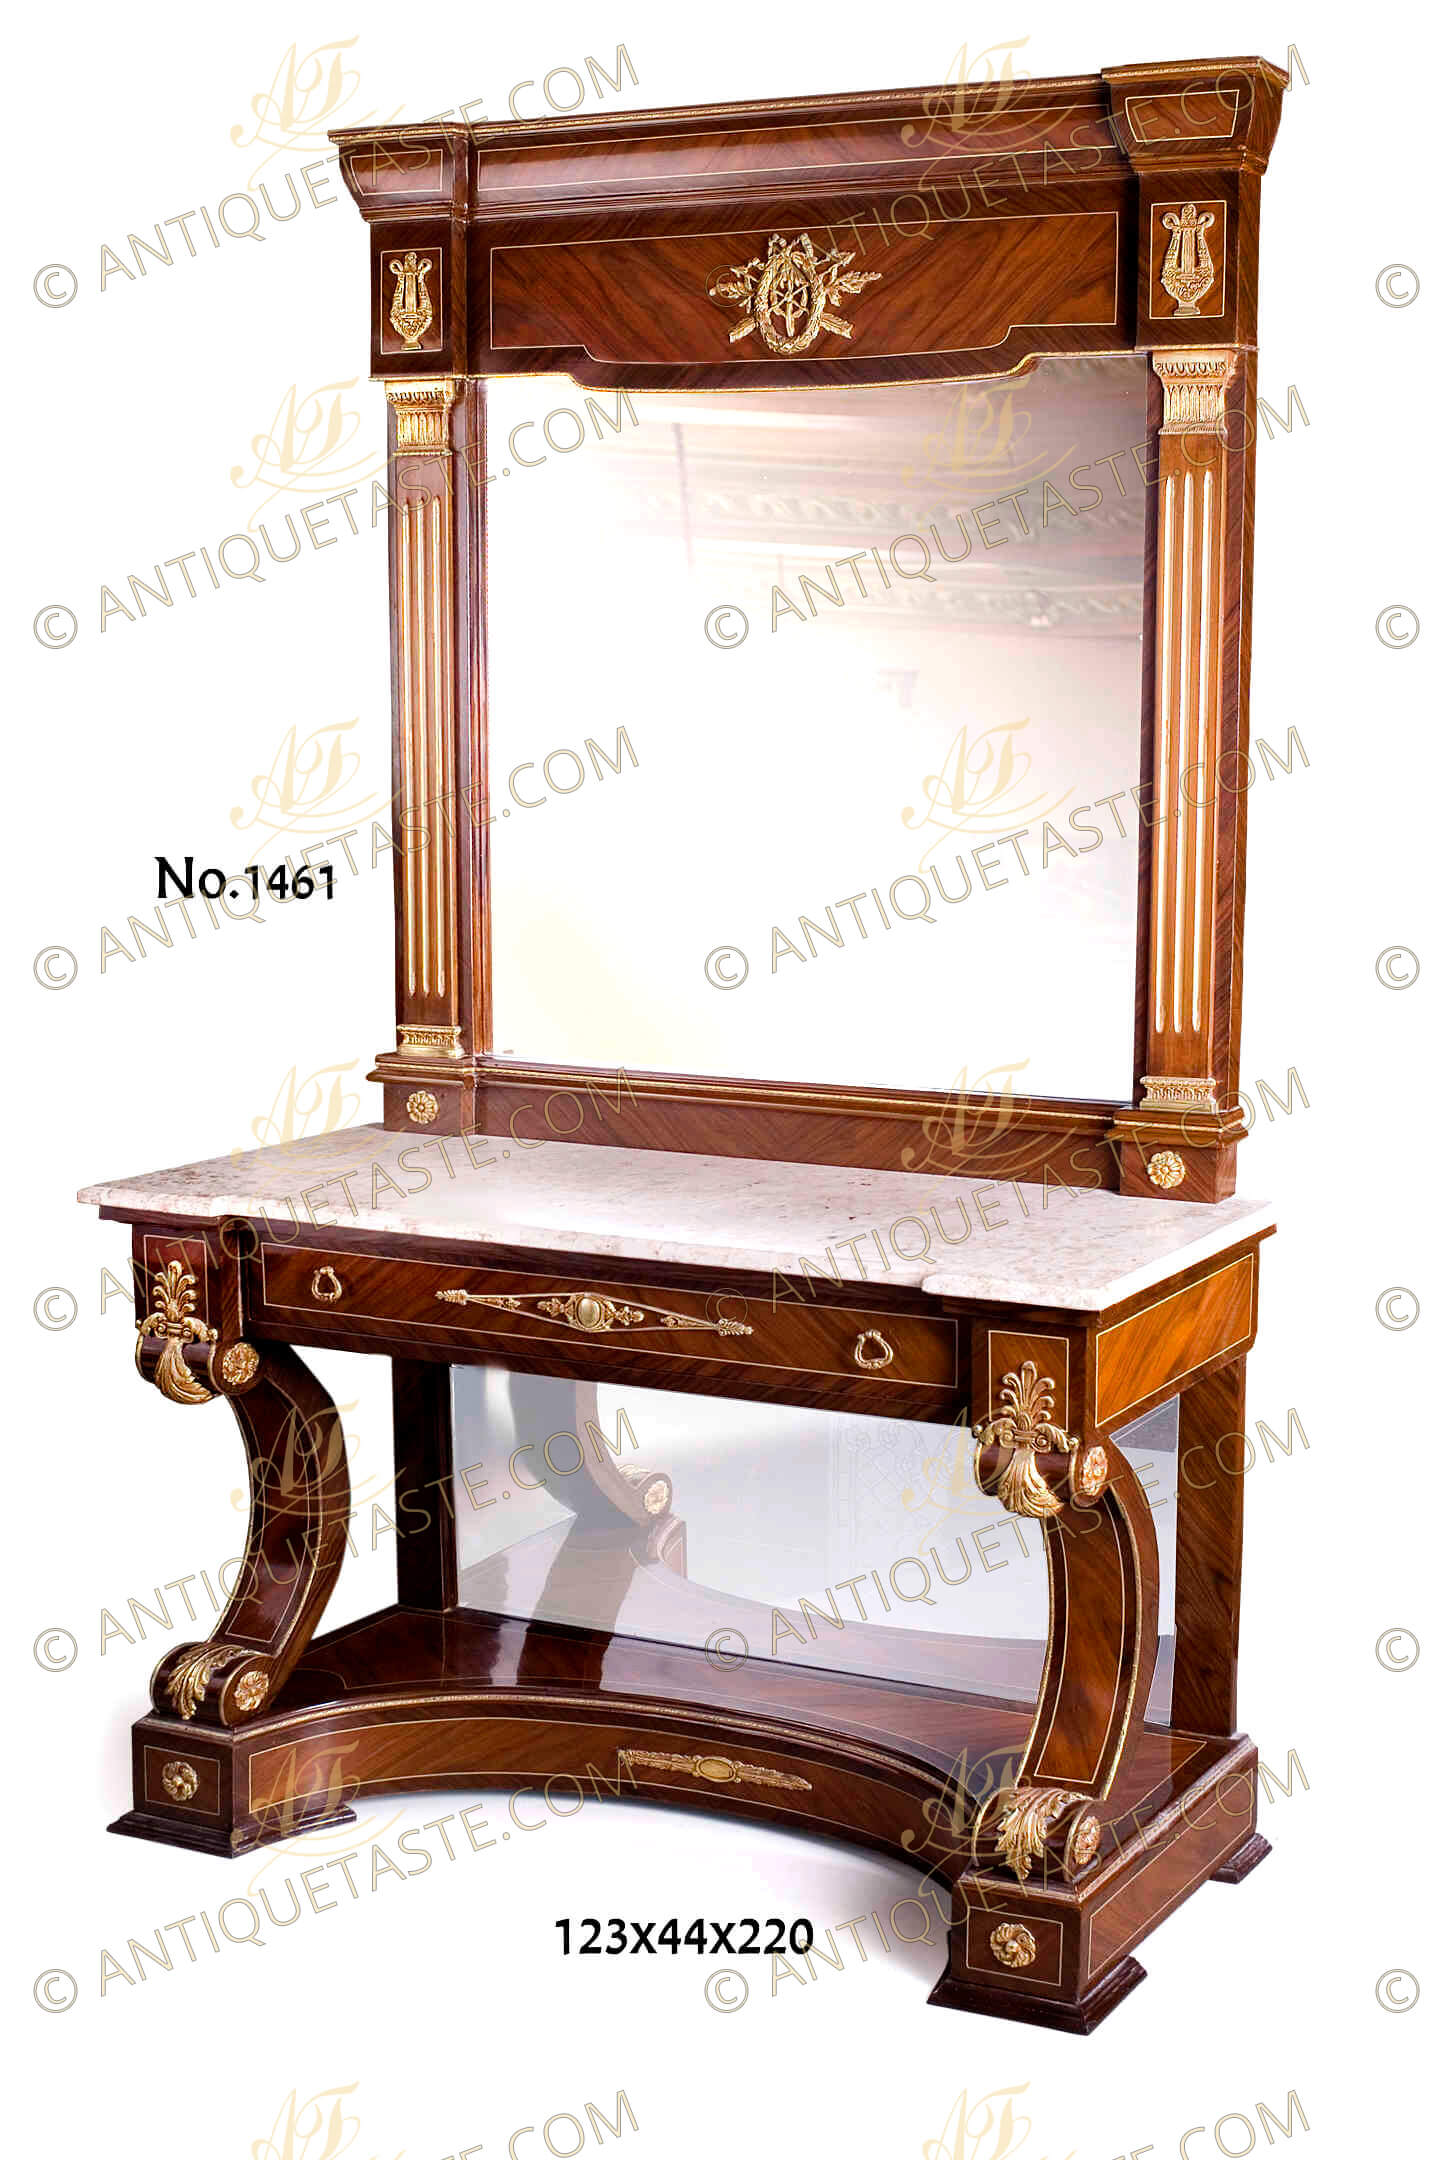 A handsome grand mid 19th century Neo-Classical style ormolu-mounted veneer inlaid mirrored console table with matching mirror, The grand trumeau form wooden beveled mirror frame sans traverse veneer and filet inlaid surmounted with a recessed Entablature top ornamented with ormolu foliate ribbon tied berried laurel wreath and arrows and ormolu lyre mount on each side, Flanked at each side with a Doric style pilasters with fluted shafts and ormolu capital and base above a protruded base with ormolu rosettes, The mirror is resting on a marble top above the shaped veneer inlaid apron with a large drawer ornamented with a central typical Neo-classical style cartouche and palmette ormolu mount, sided with blocks decorated with leafy palmettes, The console is raised on a solid platform base with mirror back plate supported by C scrolled voluted robust legs accented with ormolu acanthus leaves and ormolu rosettes  and a curved recessed plinth ornate with ormolu laurel branch and sit on beveled shaped flattened legs